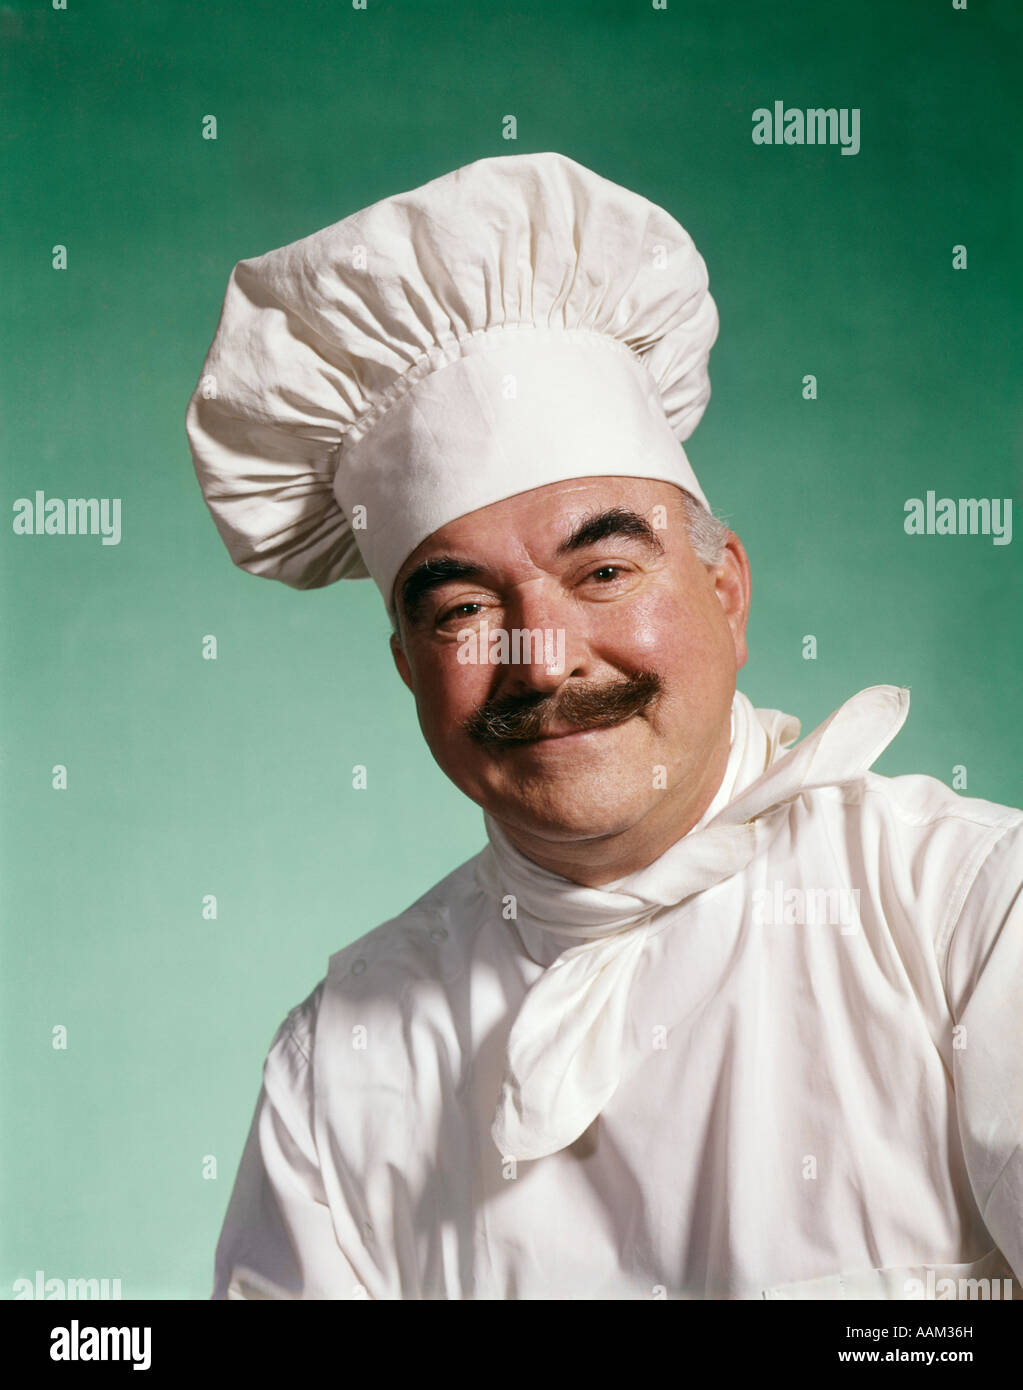 1960 MAN WEARING HAT CHEF TOQUE UNIFORME blouse blanche Photo Stock - Alamy